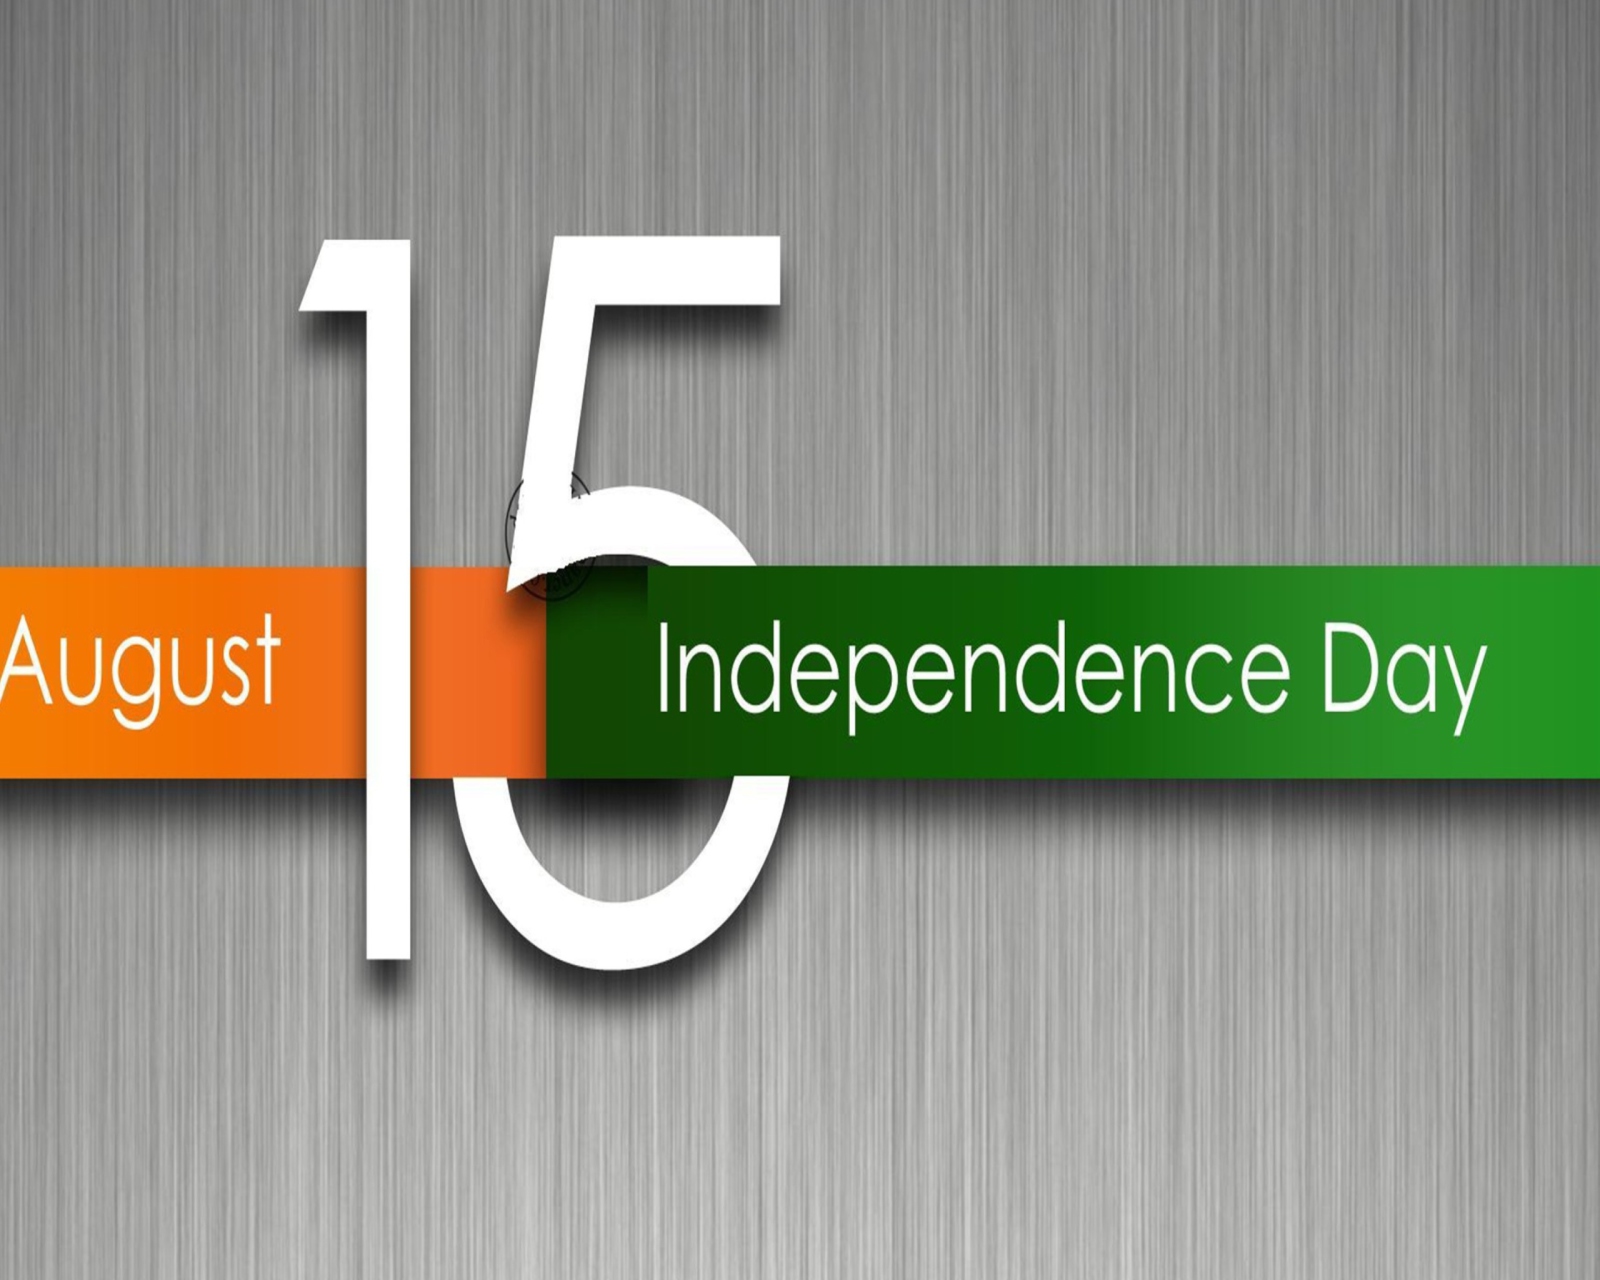 Independence Day in India wallpaper 1600x1280